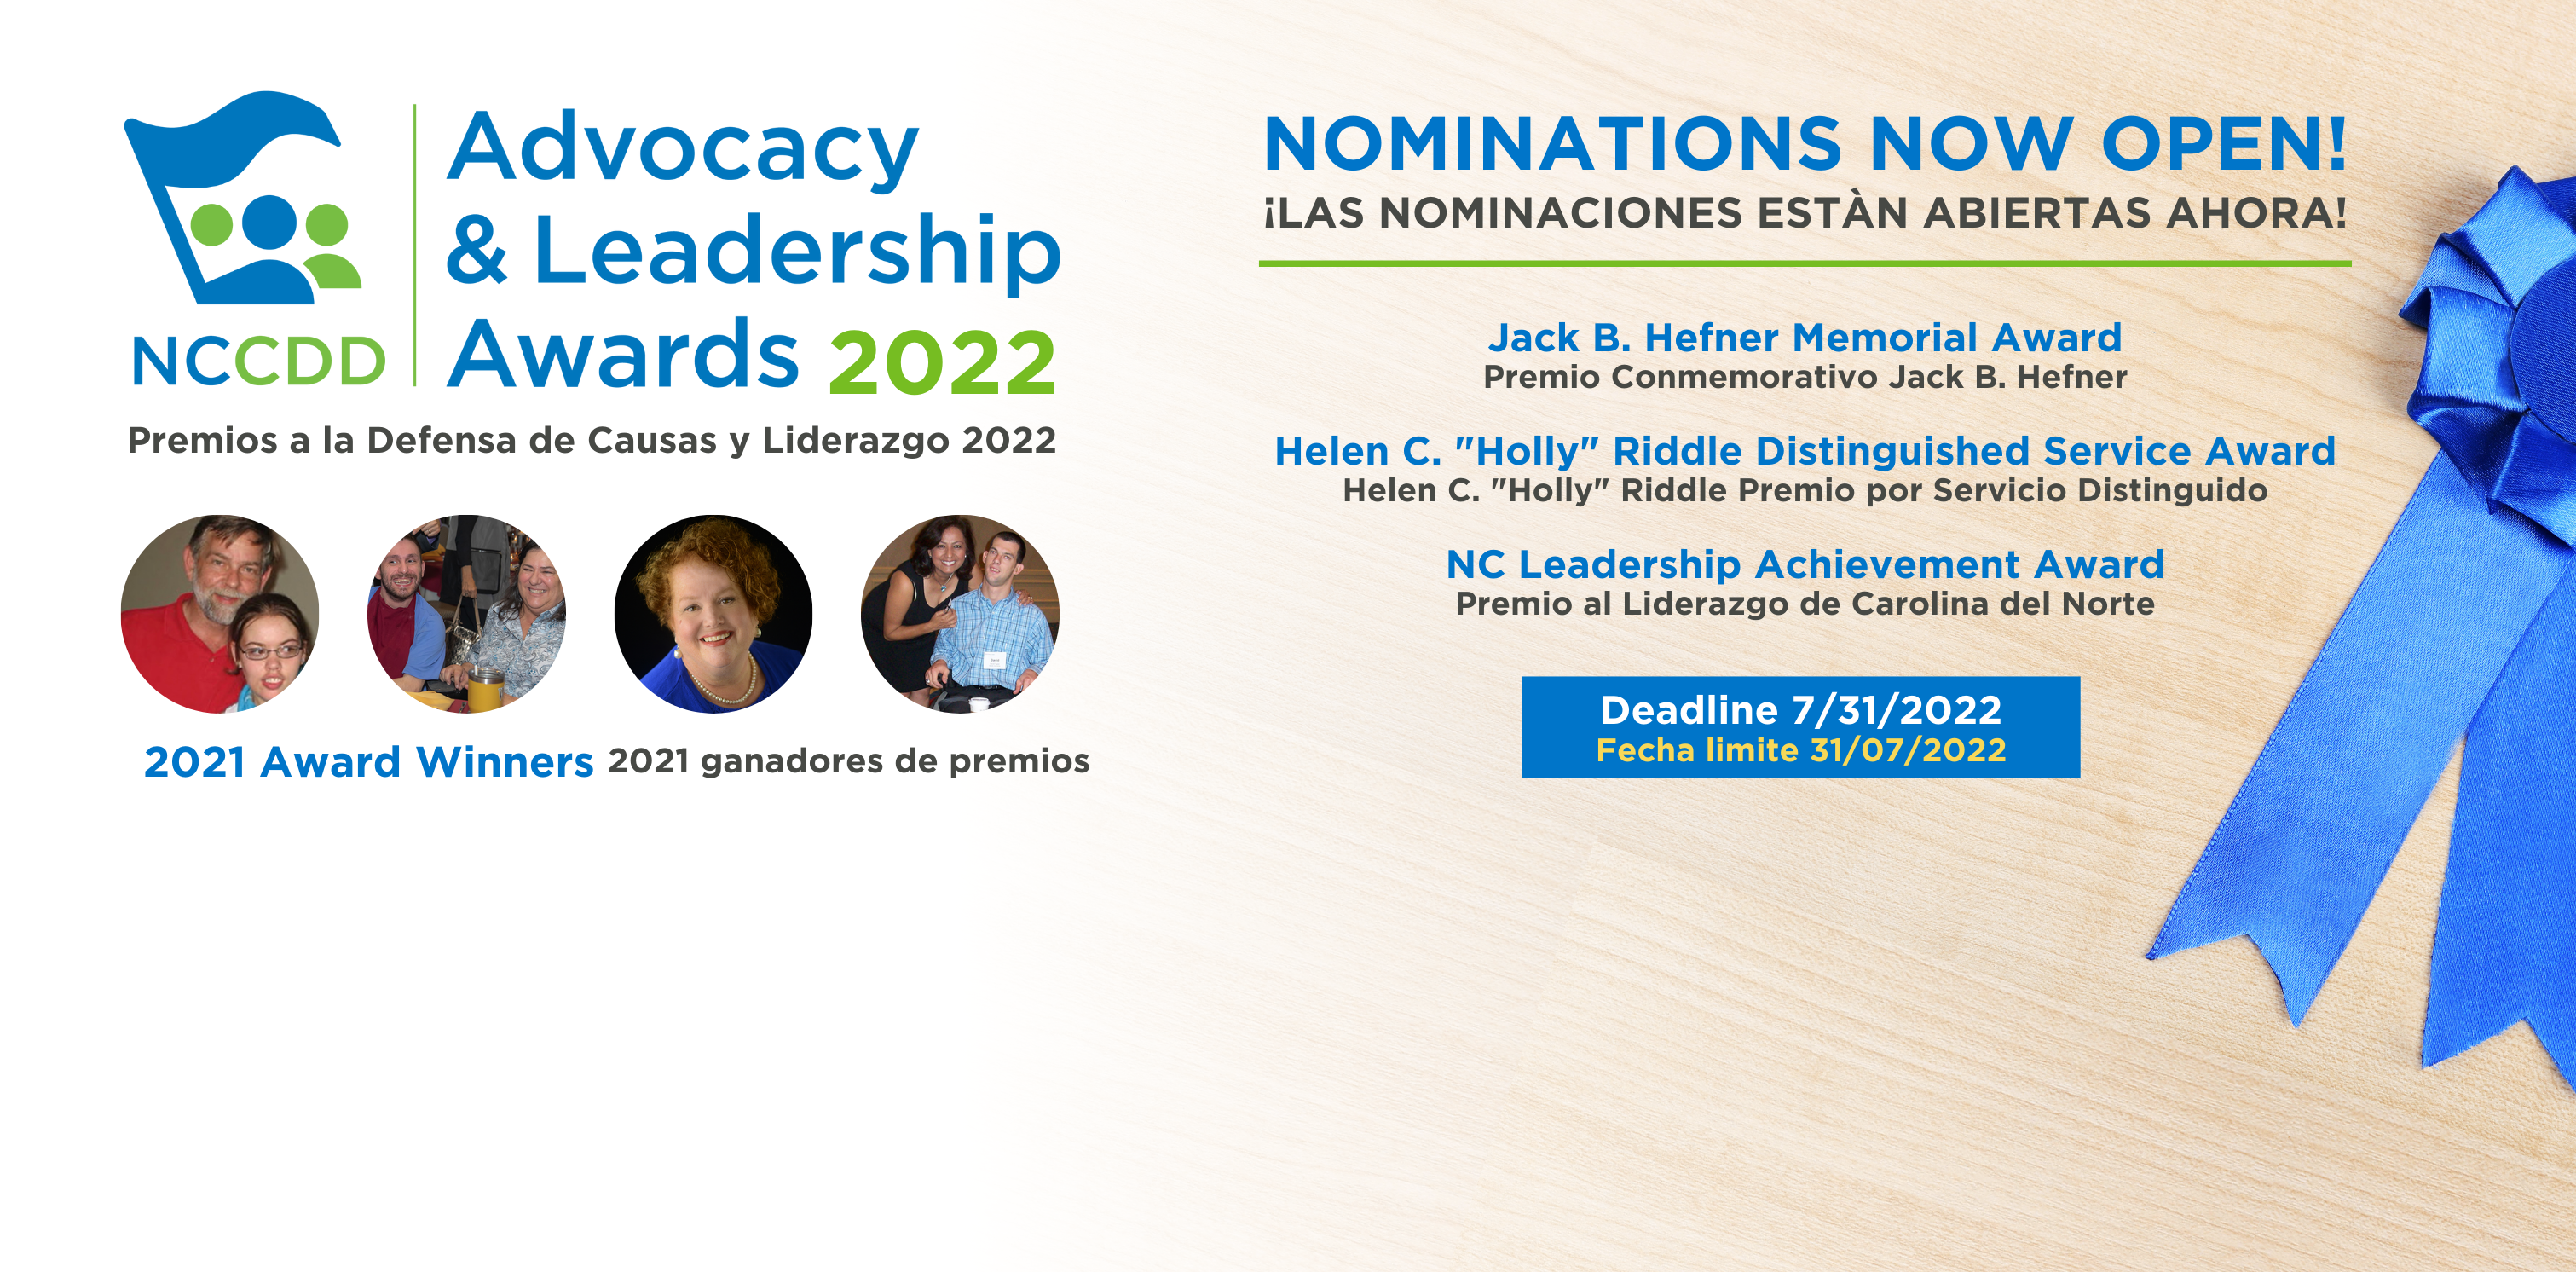 Advocacy and Leadership Awards Nominations Open in English & Spanish. Deadline July 30, 2021.